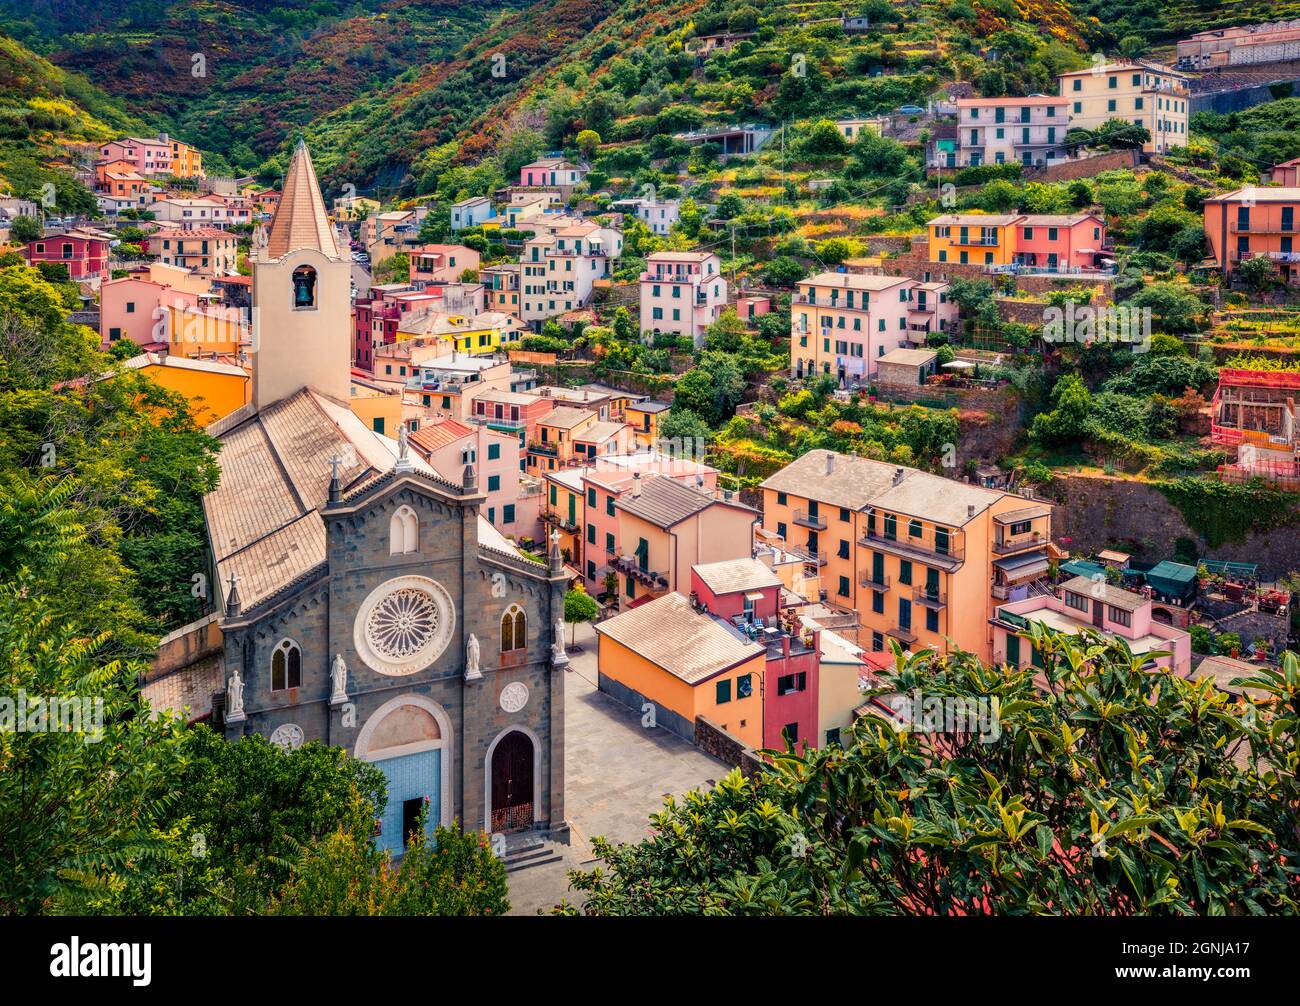 First city of the Cique Terre sequence of hill cities - Riomaggiore with tower of Church of San Giovanni Battista. Wonderful summer scene of Liguria, Stock Photo